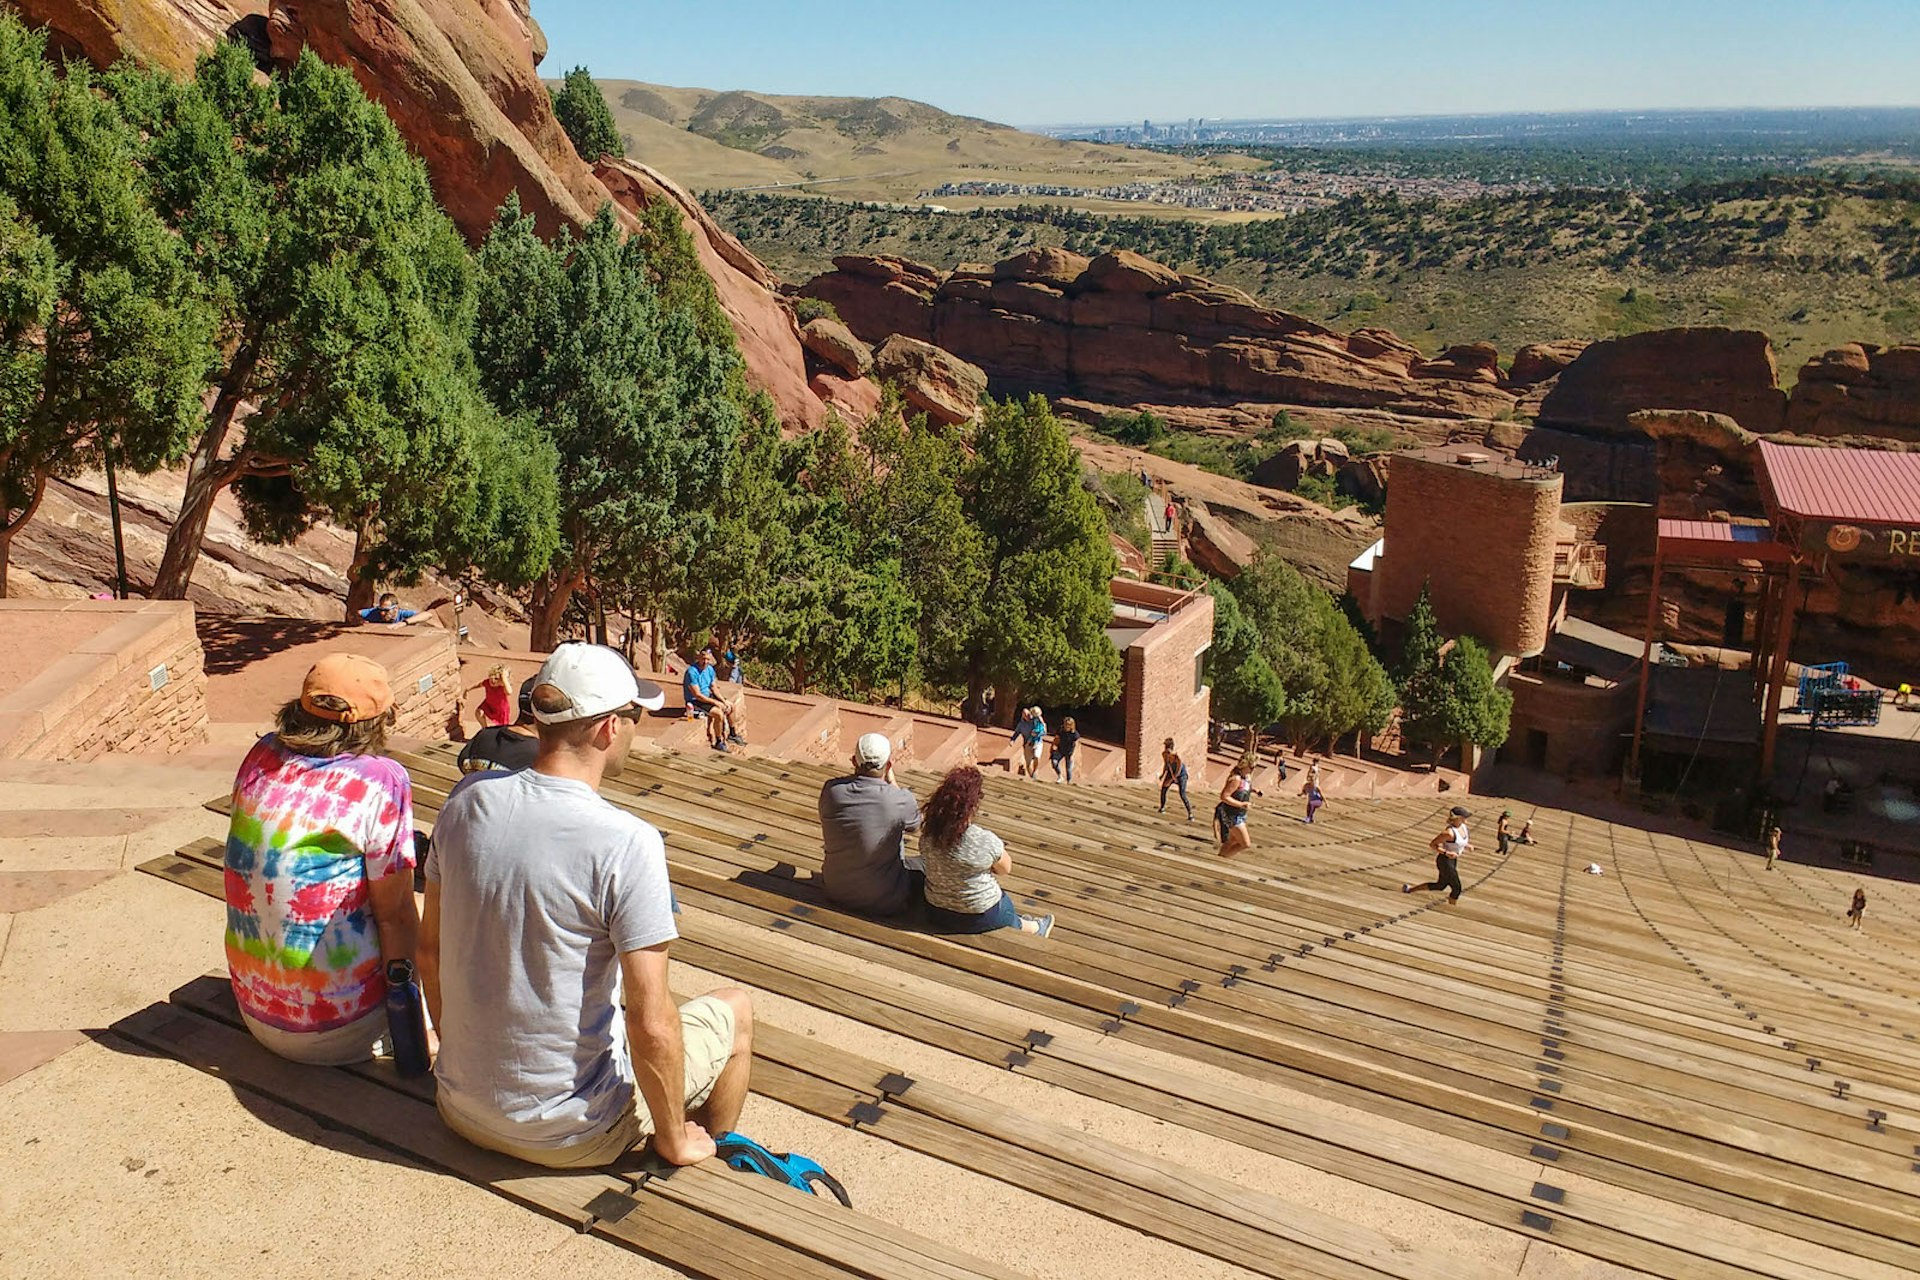 Attracting both major acts and indie artists, crowds love Red Rocks Amphitheatre © Liza Prado / Lonely Planet